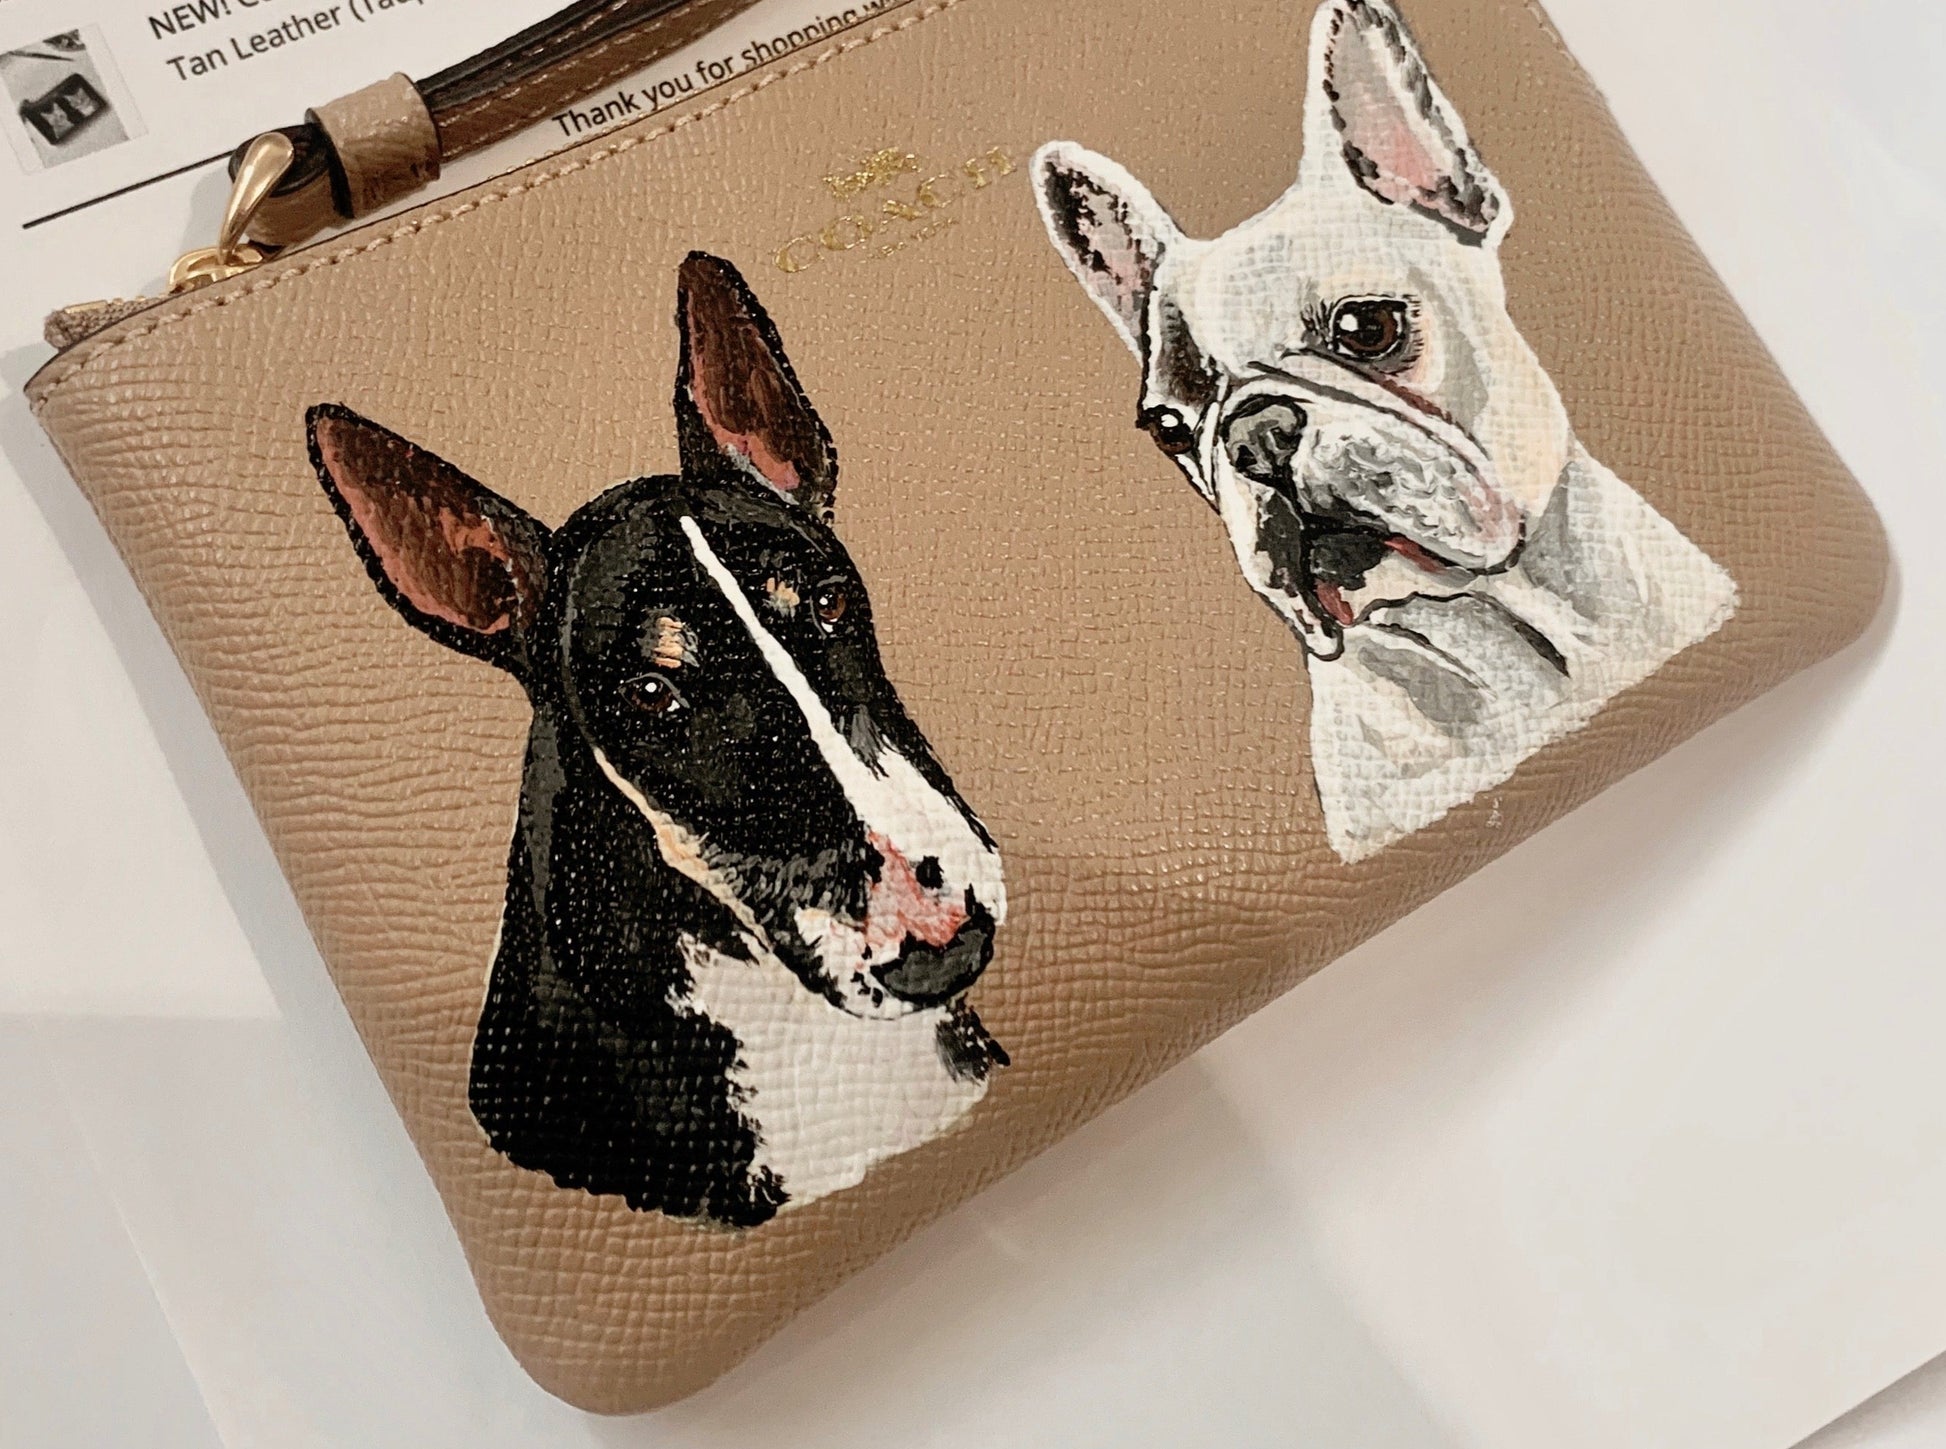 Dog & Cat Harmony Personalized Clutch Purse - A Gift for Pet Lovers